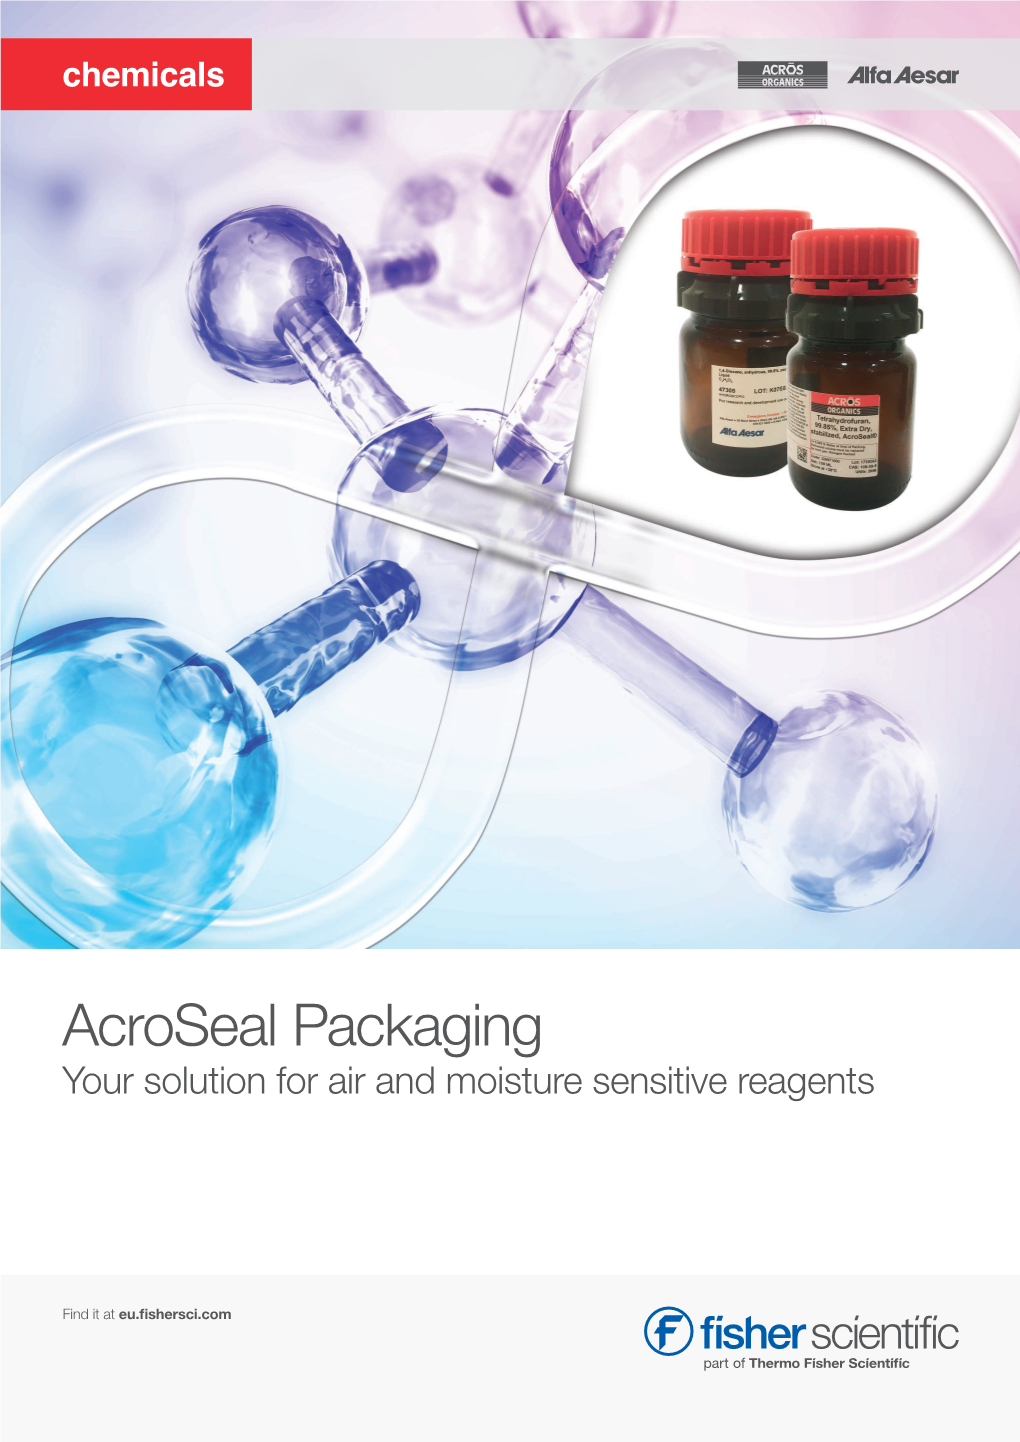 Acroseal Packaging Your Solution for Air and Moisture Sensitive Reagents